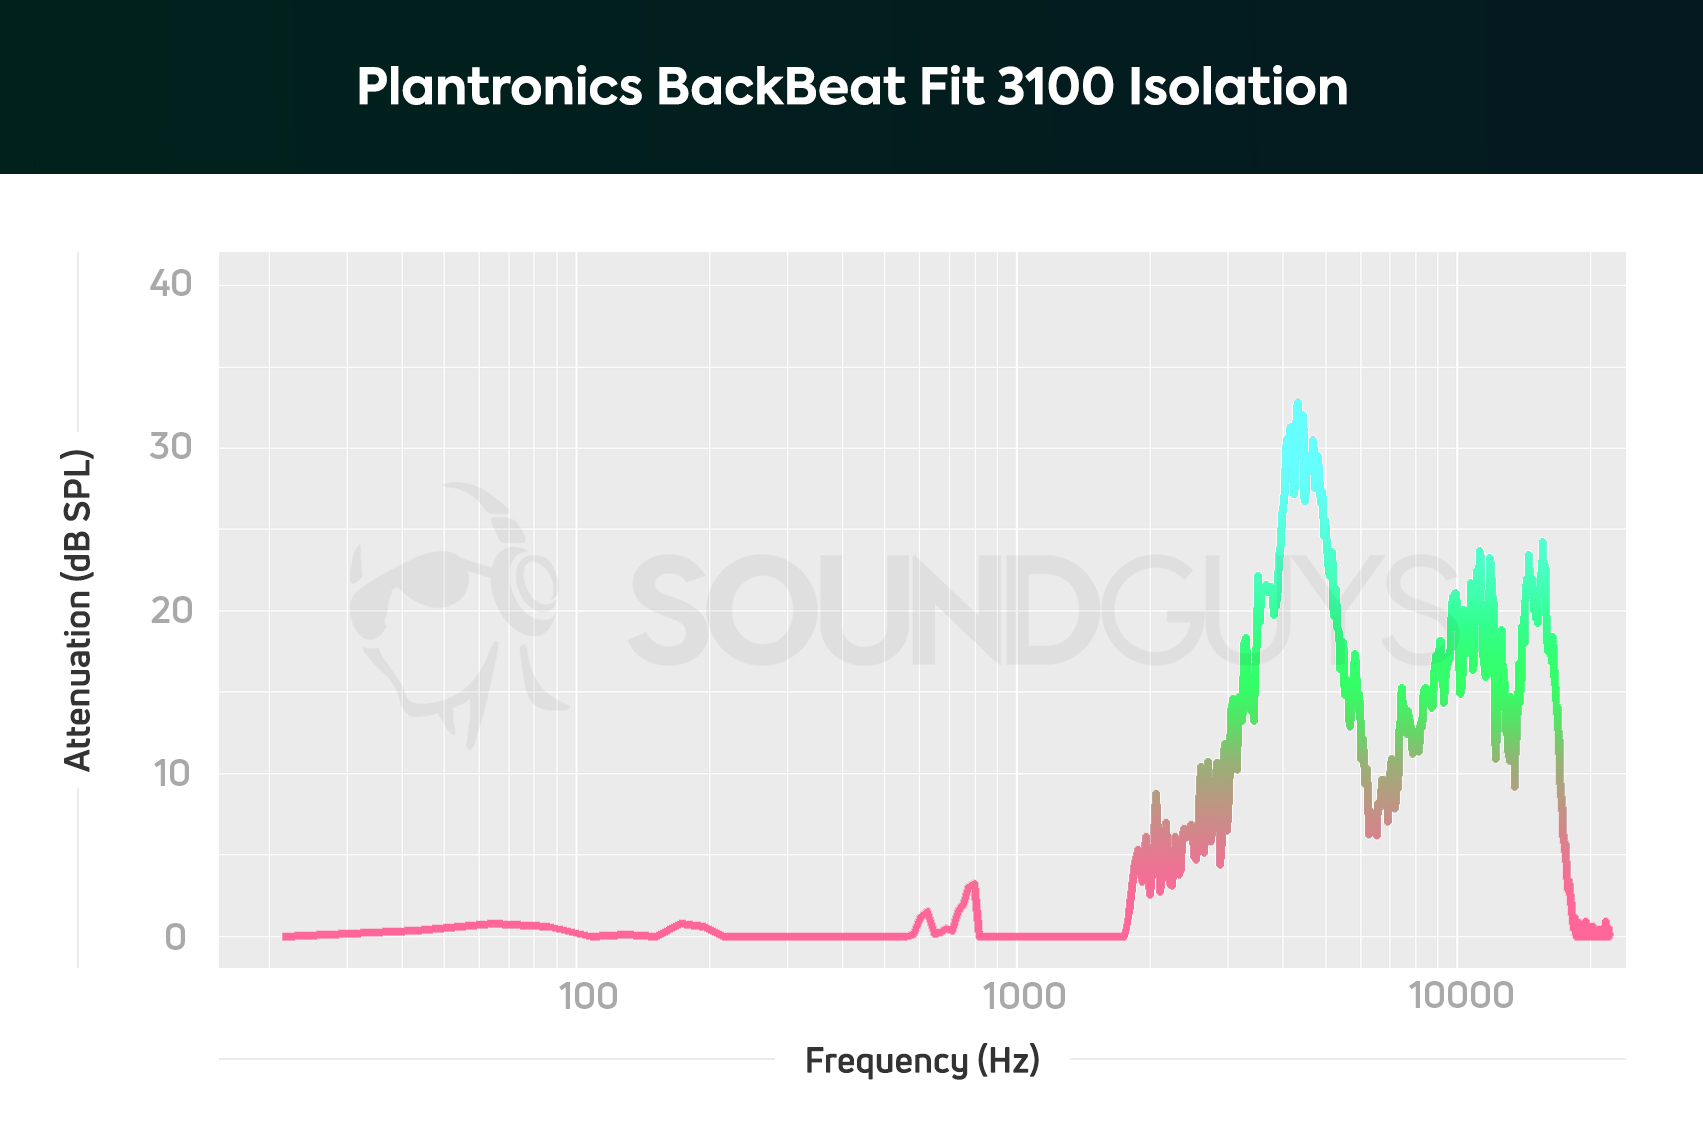 Plantronics BackBeat Fit 3100: A chart showing the isolation performance of the Plantronics BackBeat Fit 3100.